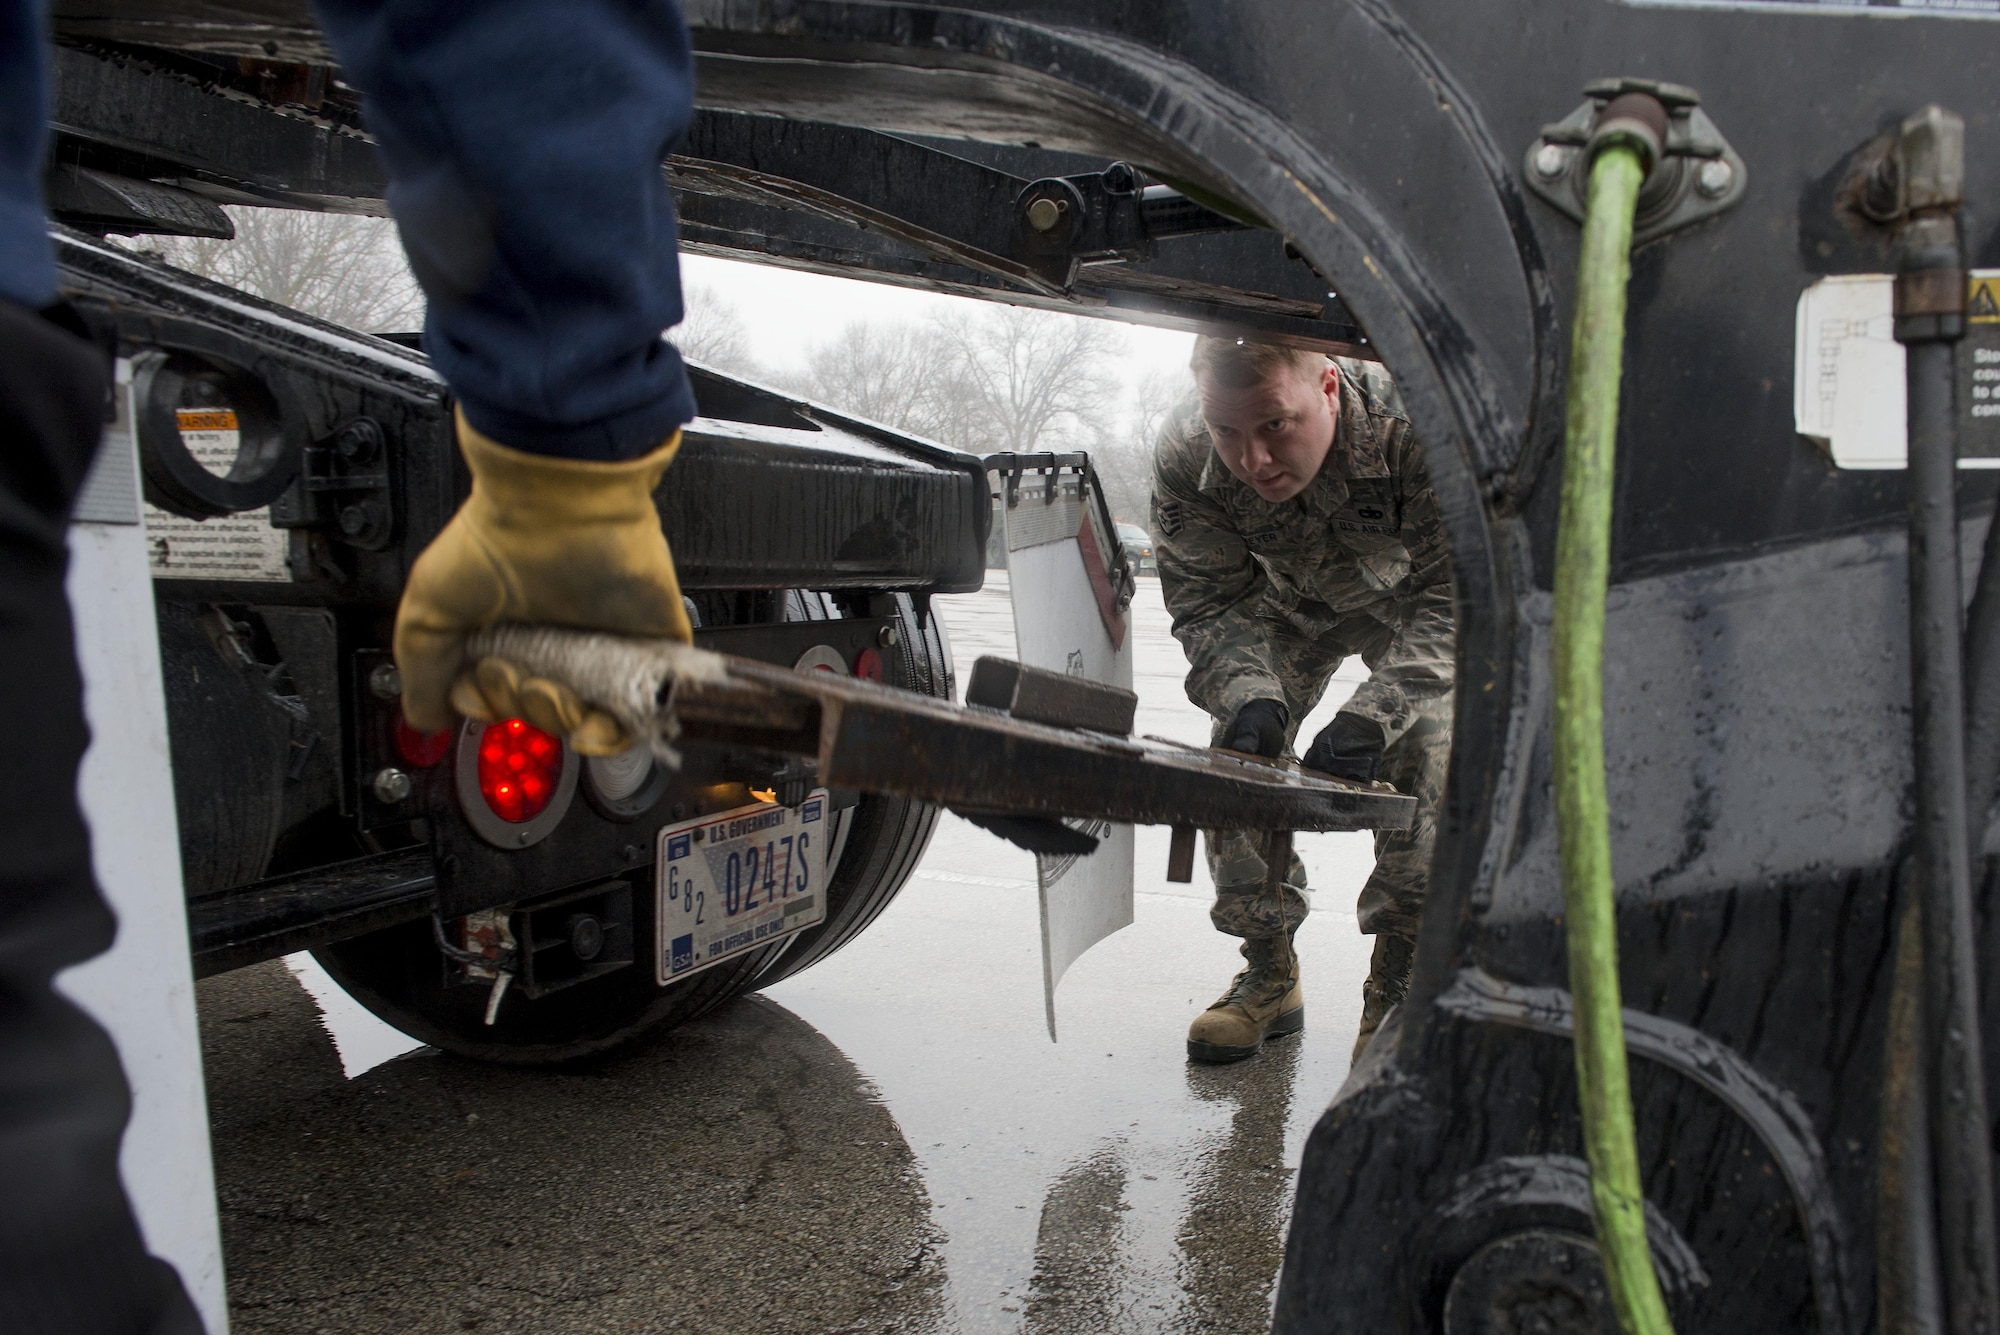 Staff Sgt. Joshua Meyer, 375th Logistics Readiness Squadron vehicle operations control center NCOIC, lifts the Meyer’s Bar onto the hitch of the lowboy Jan. 19 at Scott Air Force Base, Ill. The “Meyers Bar,” nicknamed after its inventor, Staff Sgt. Joshua Meyer, is a 5-foot reinforced steel bar that has been constructed to support a lowboy trailer’s hydraulic gooseneck hitch to prevent it from bending. (U.S. Air Force photo/Senior Airman Joshua Eikren)